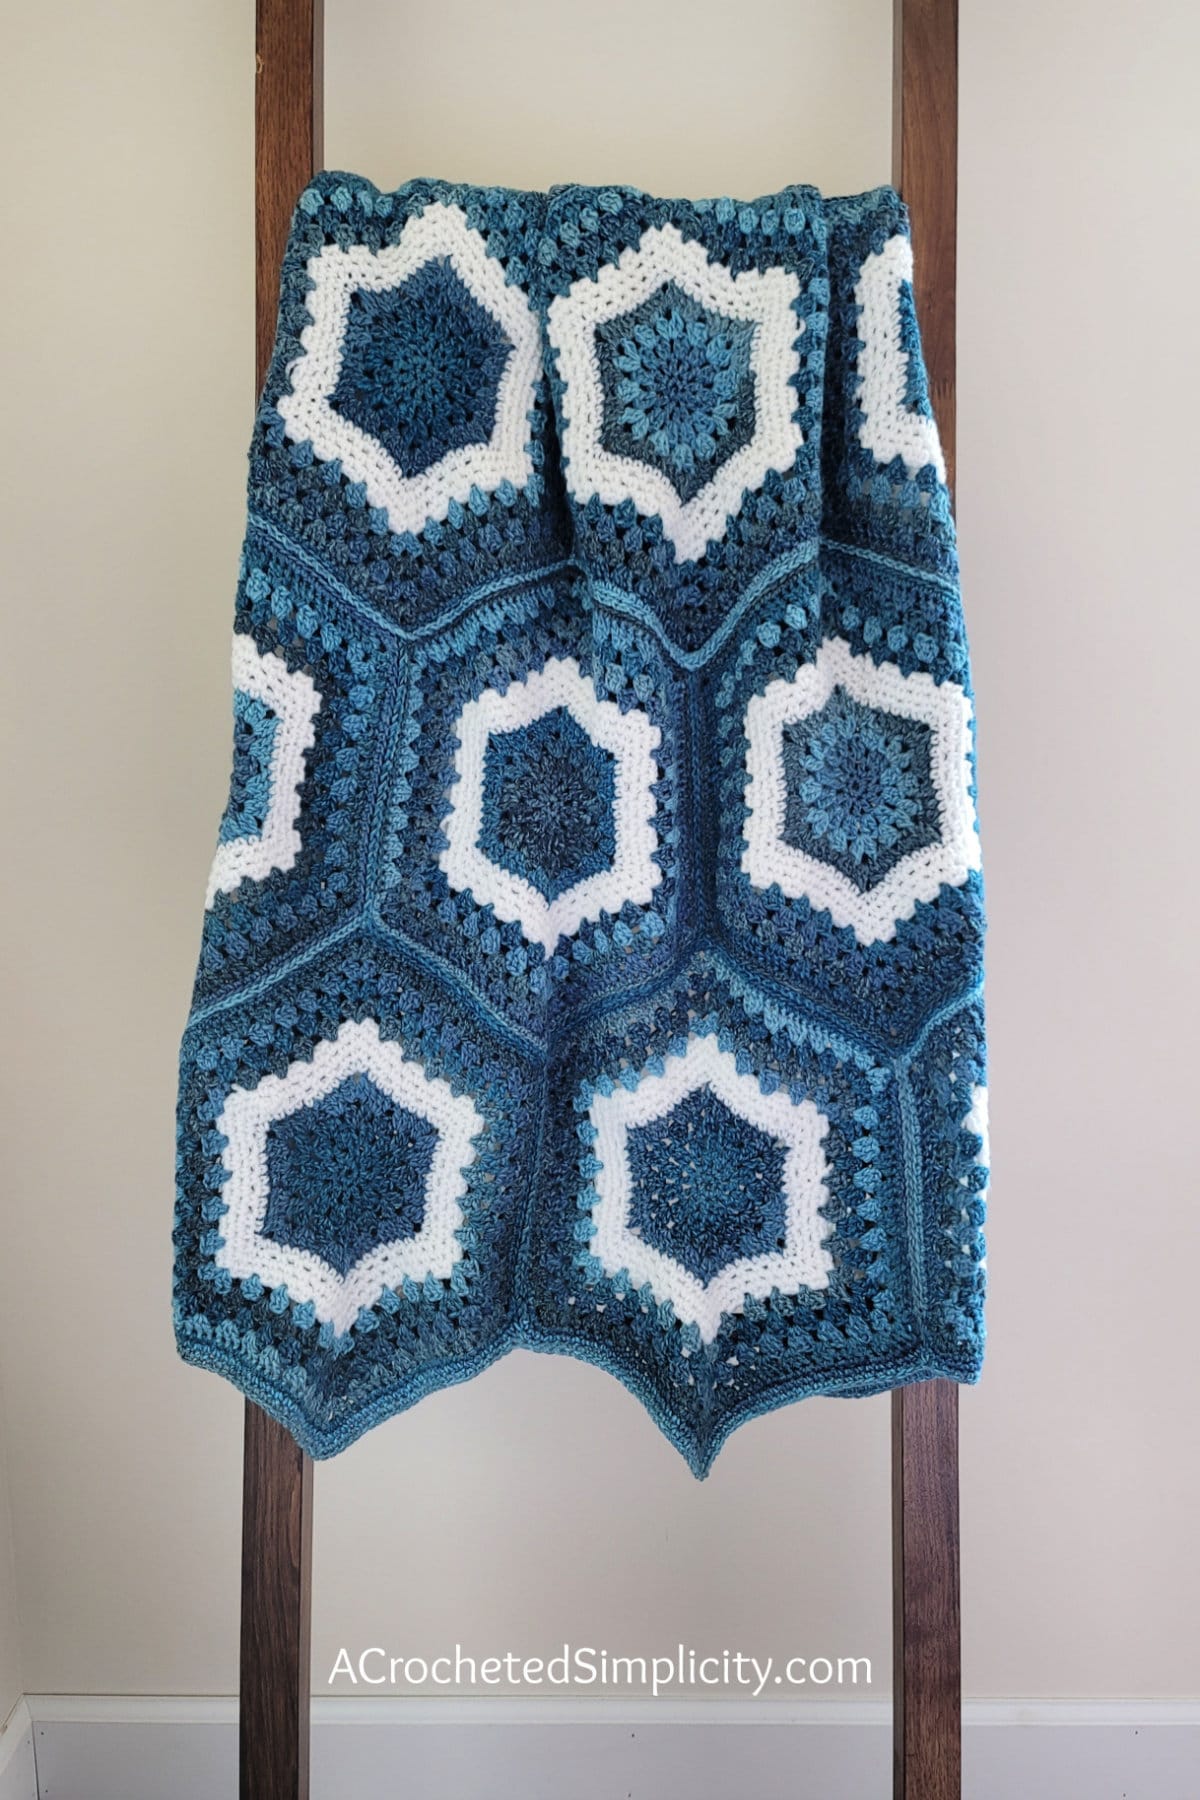 Crochet hexagon blanket in shades of blue and white yarn hanging on wood blanket ladder.